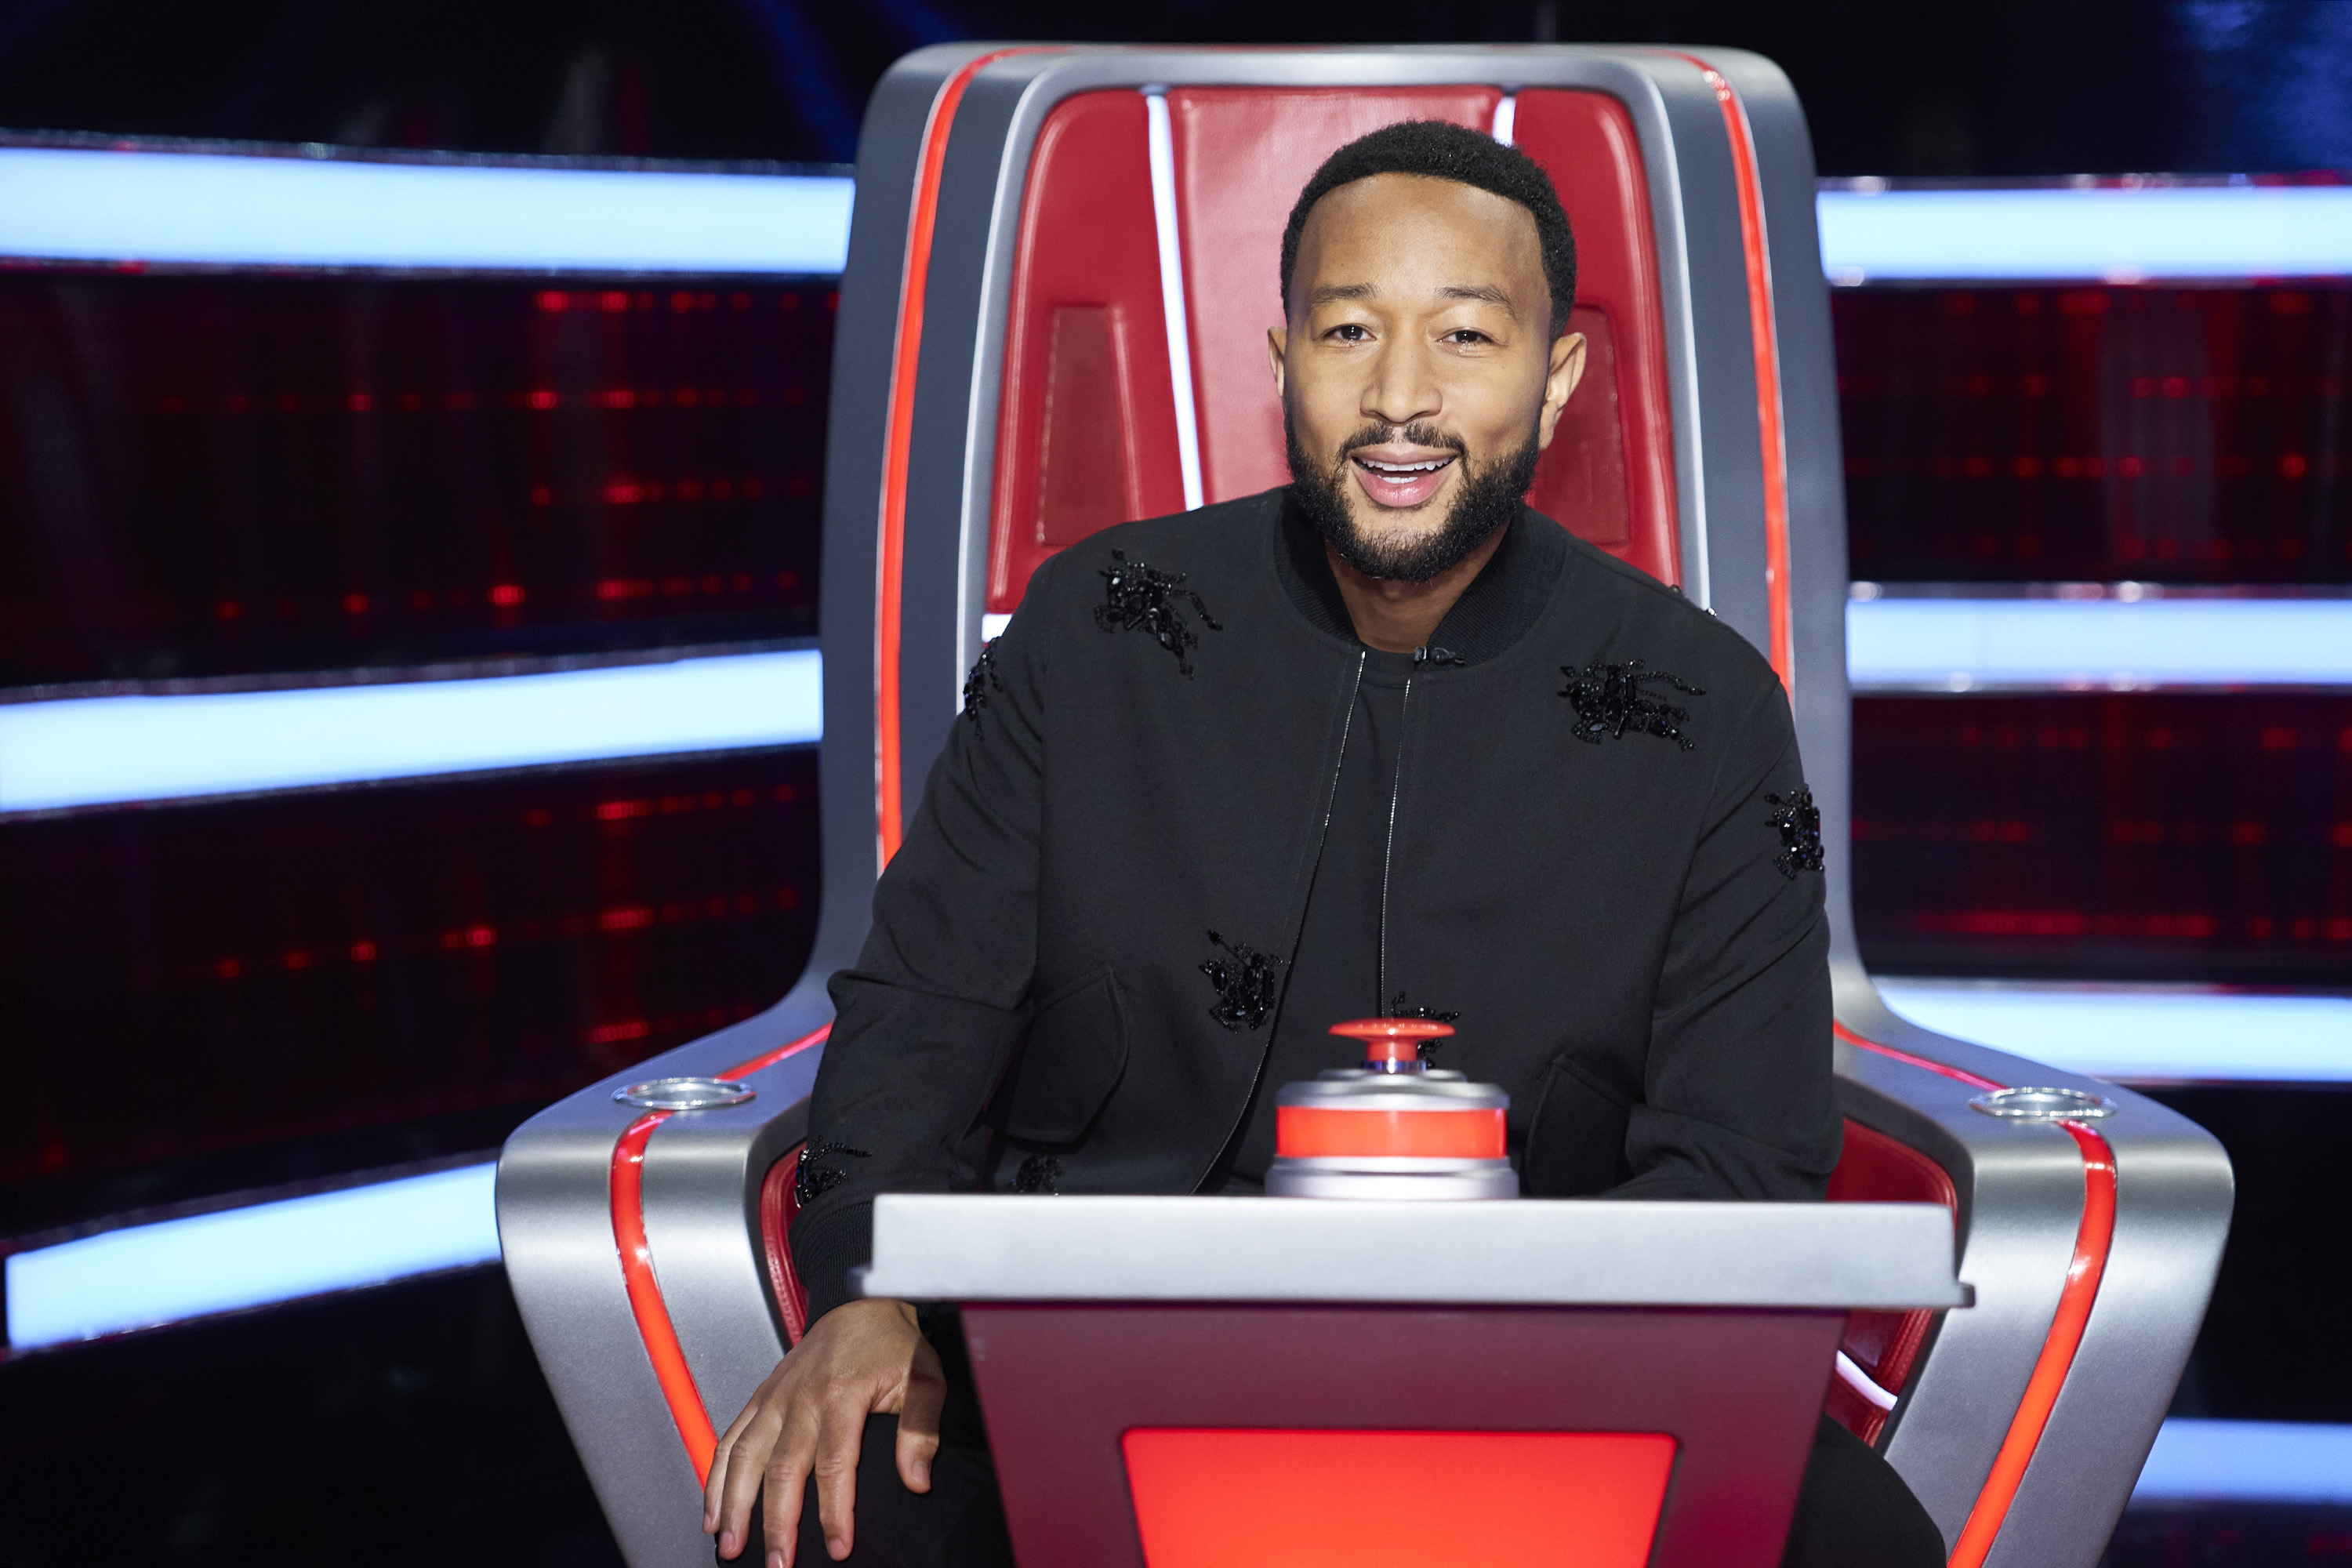 John Legend on the set of "The Voice." | Source: Getty Images